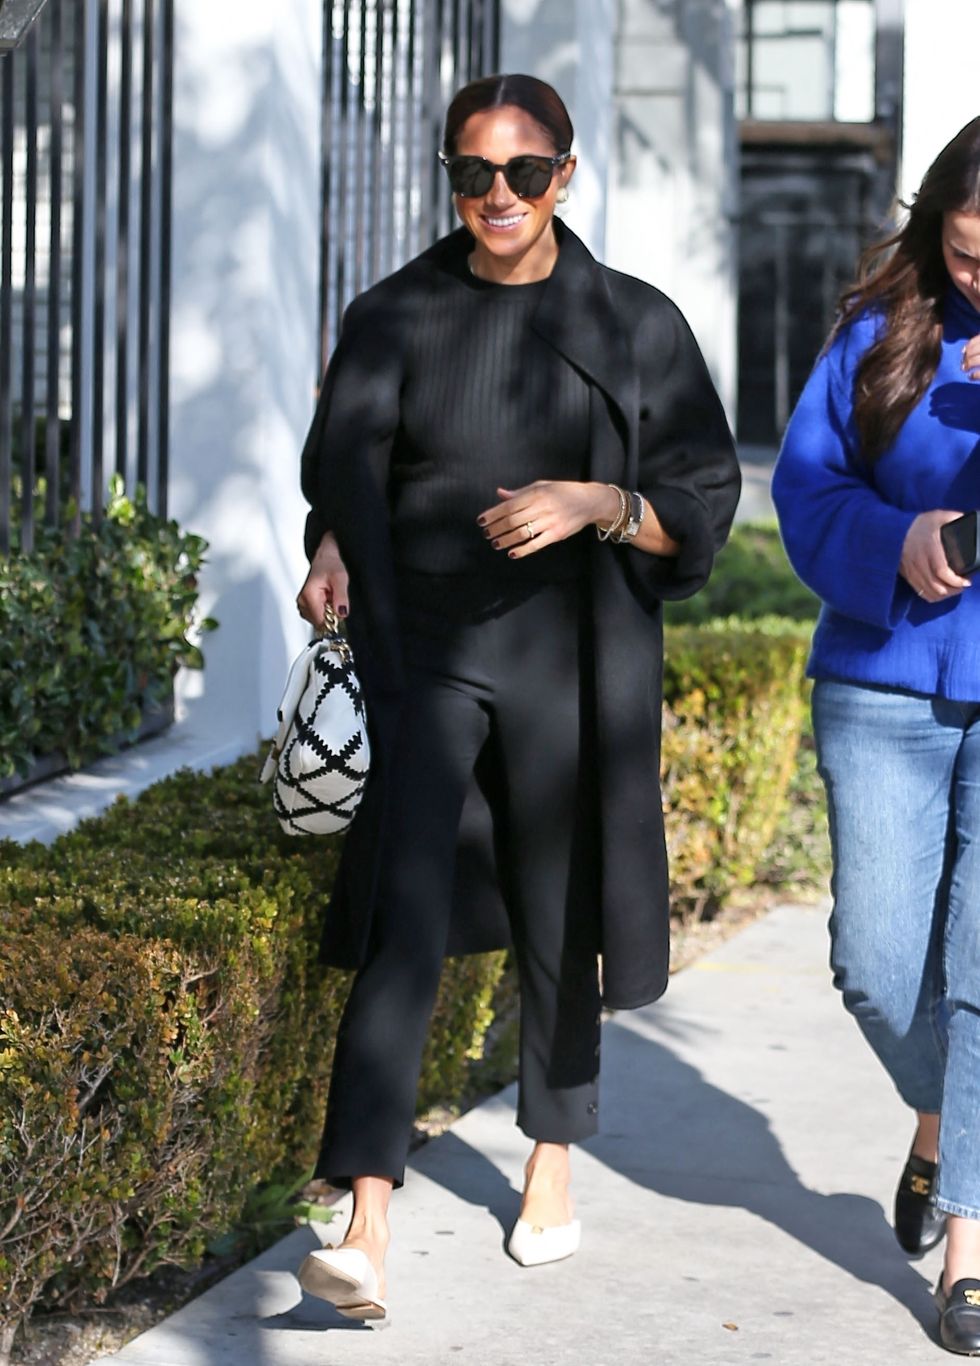 meghan markle walking while wearing an all black outfit and white flats